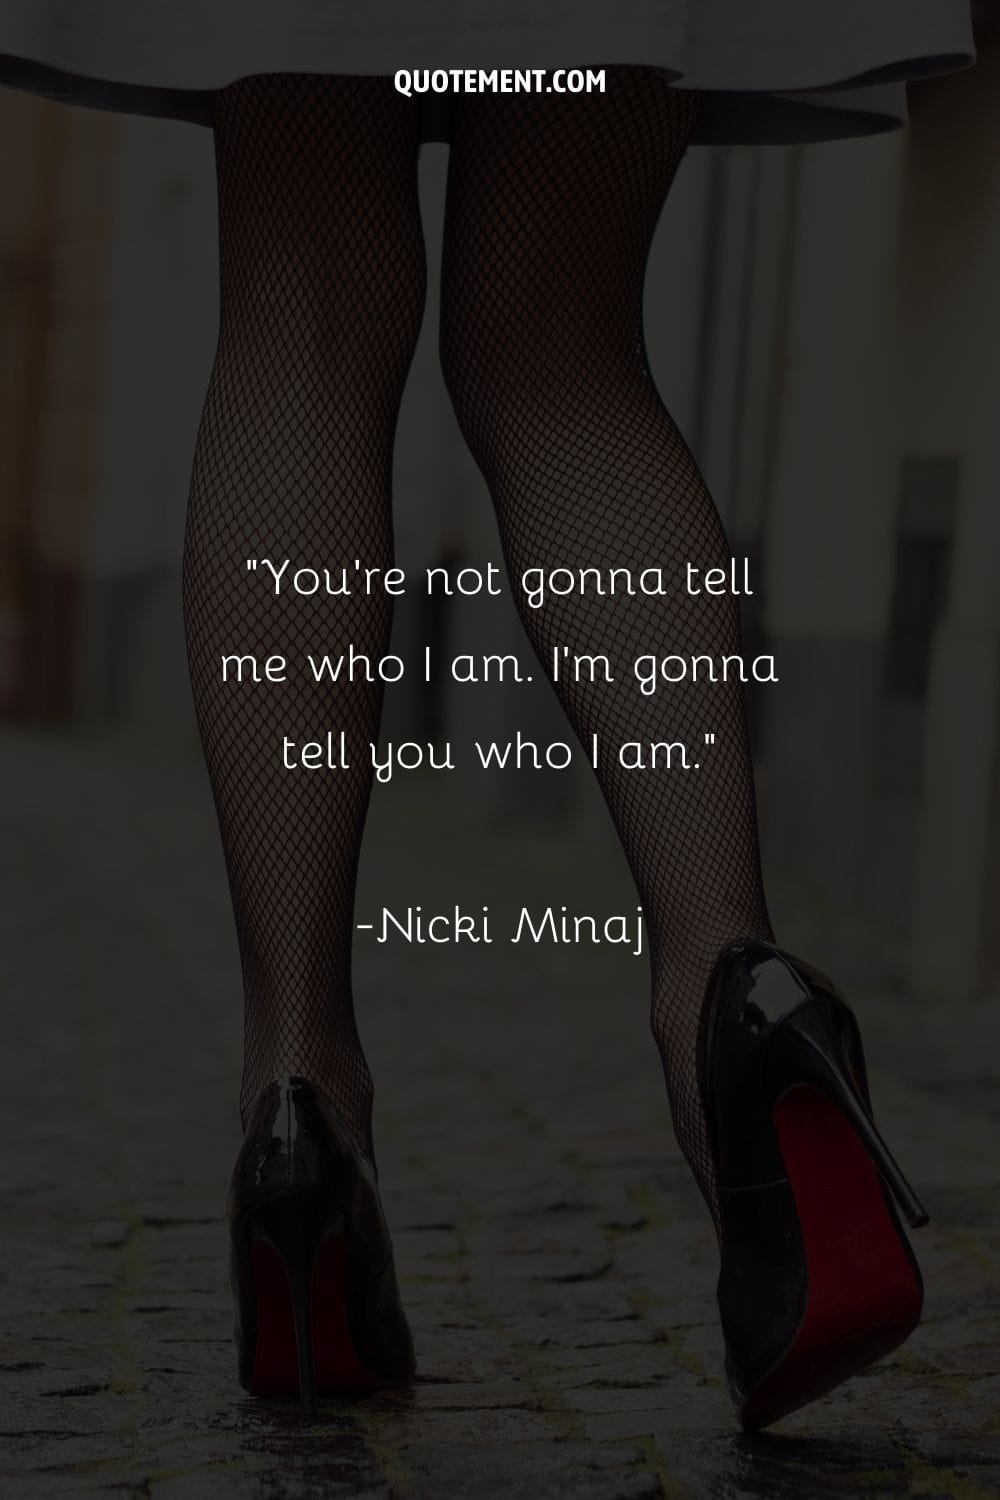 Image of a woman walking in heels representing sassy attitude quote.